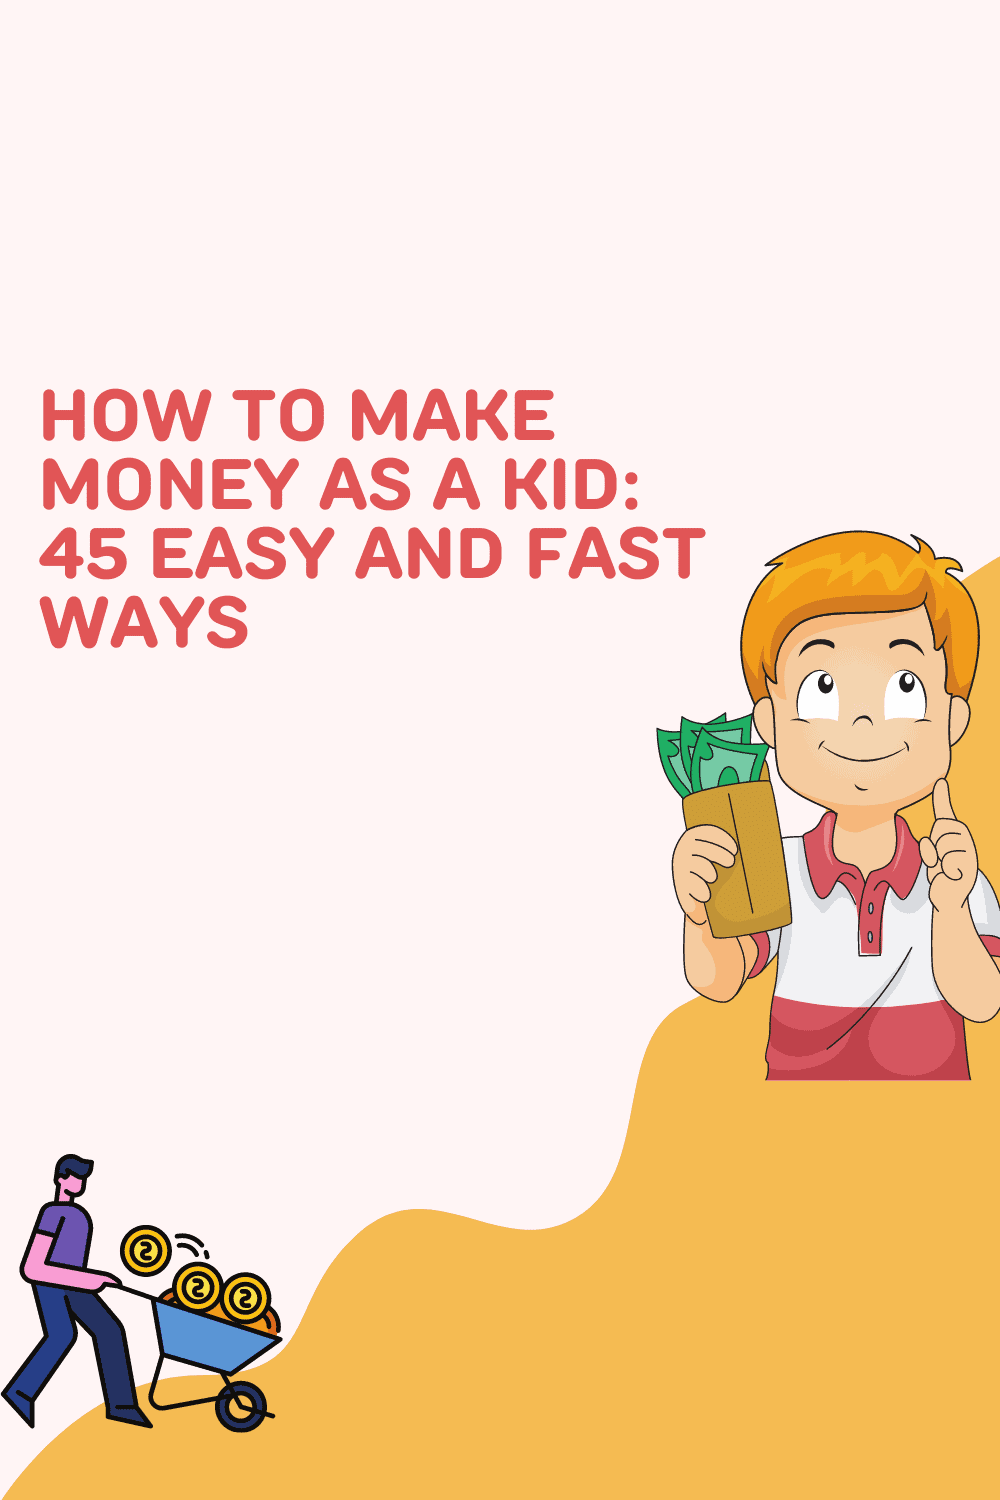 How To Make Money as a Kid in 2022 (45 Easy and Fast Ways)